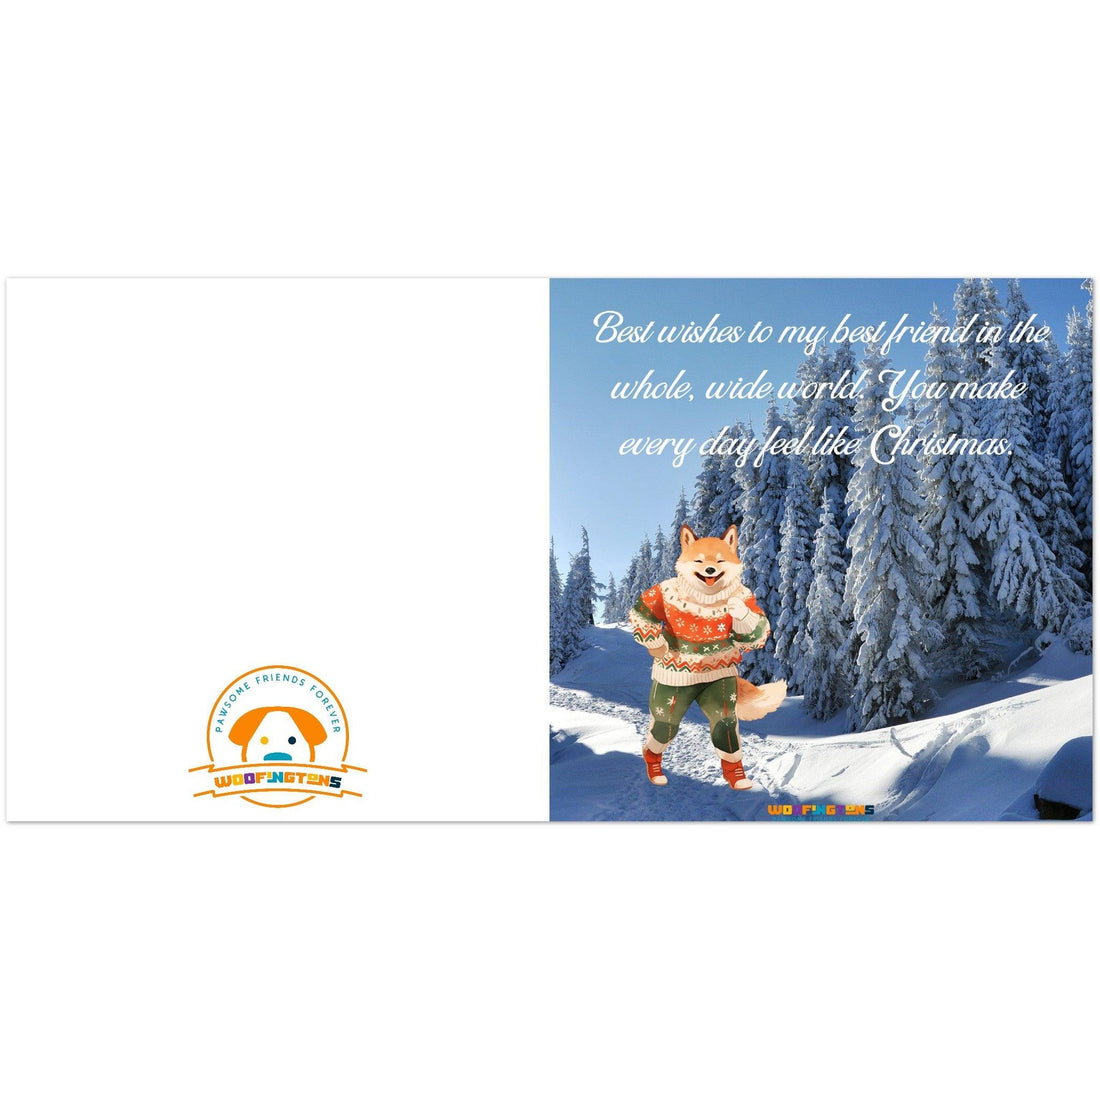 &quot;Best wishes to my best friend in the whole, wide world. You make every day feel like Christmas.&quot; - Whimsical Winter Dog Christmas Card - Pack of 10 Greeting Cards (premium envelopes) - Woofingtons